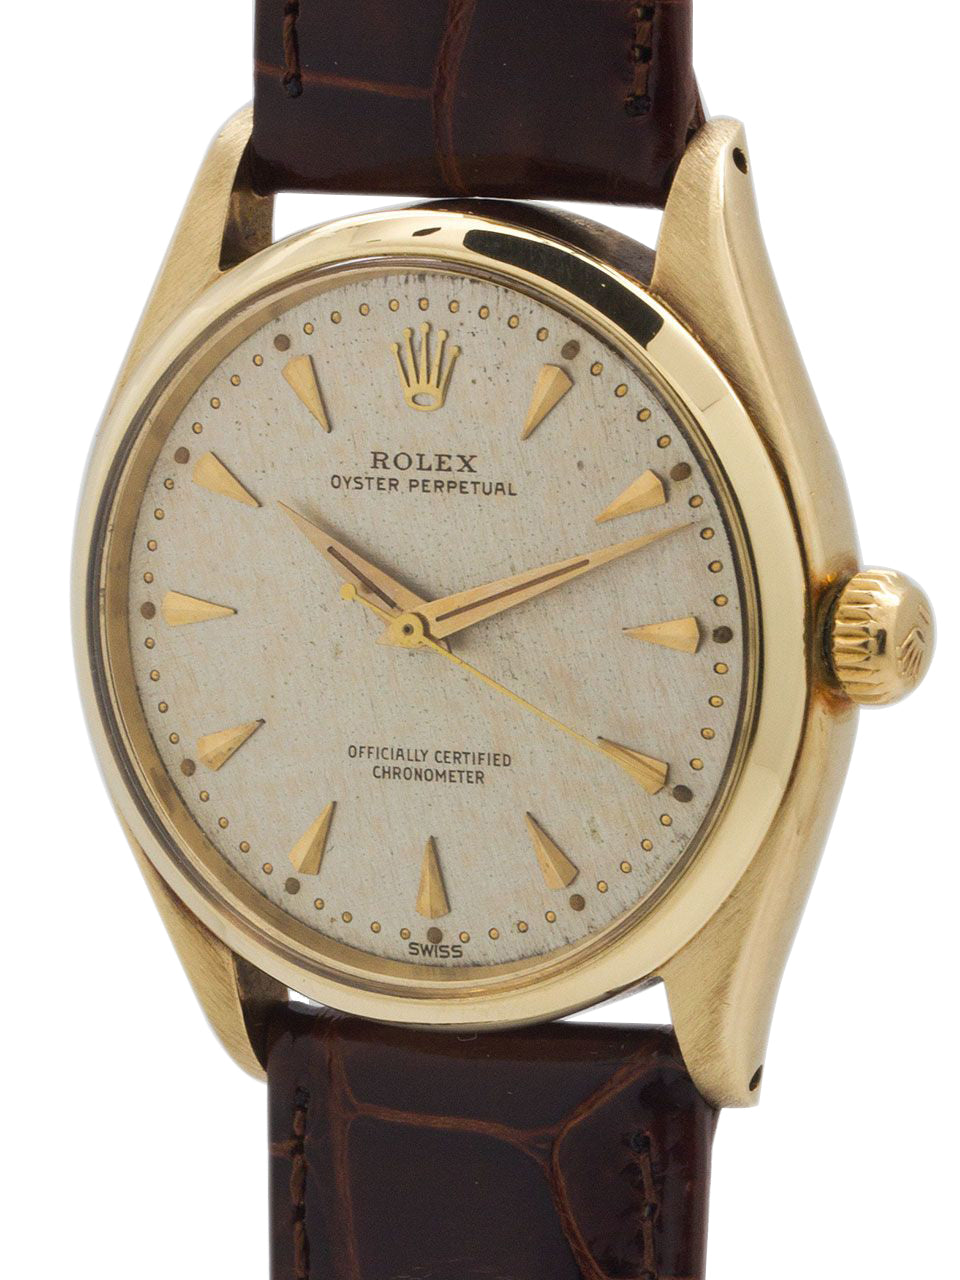 Rolex Oyster Perpetual 6564 4